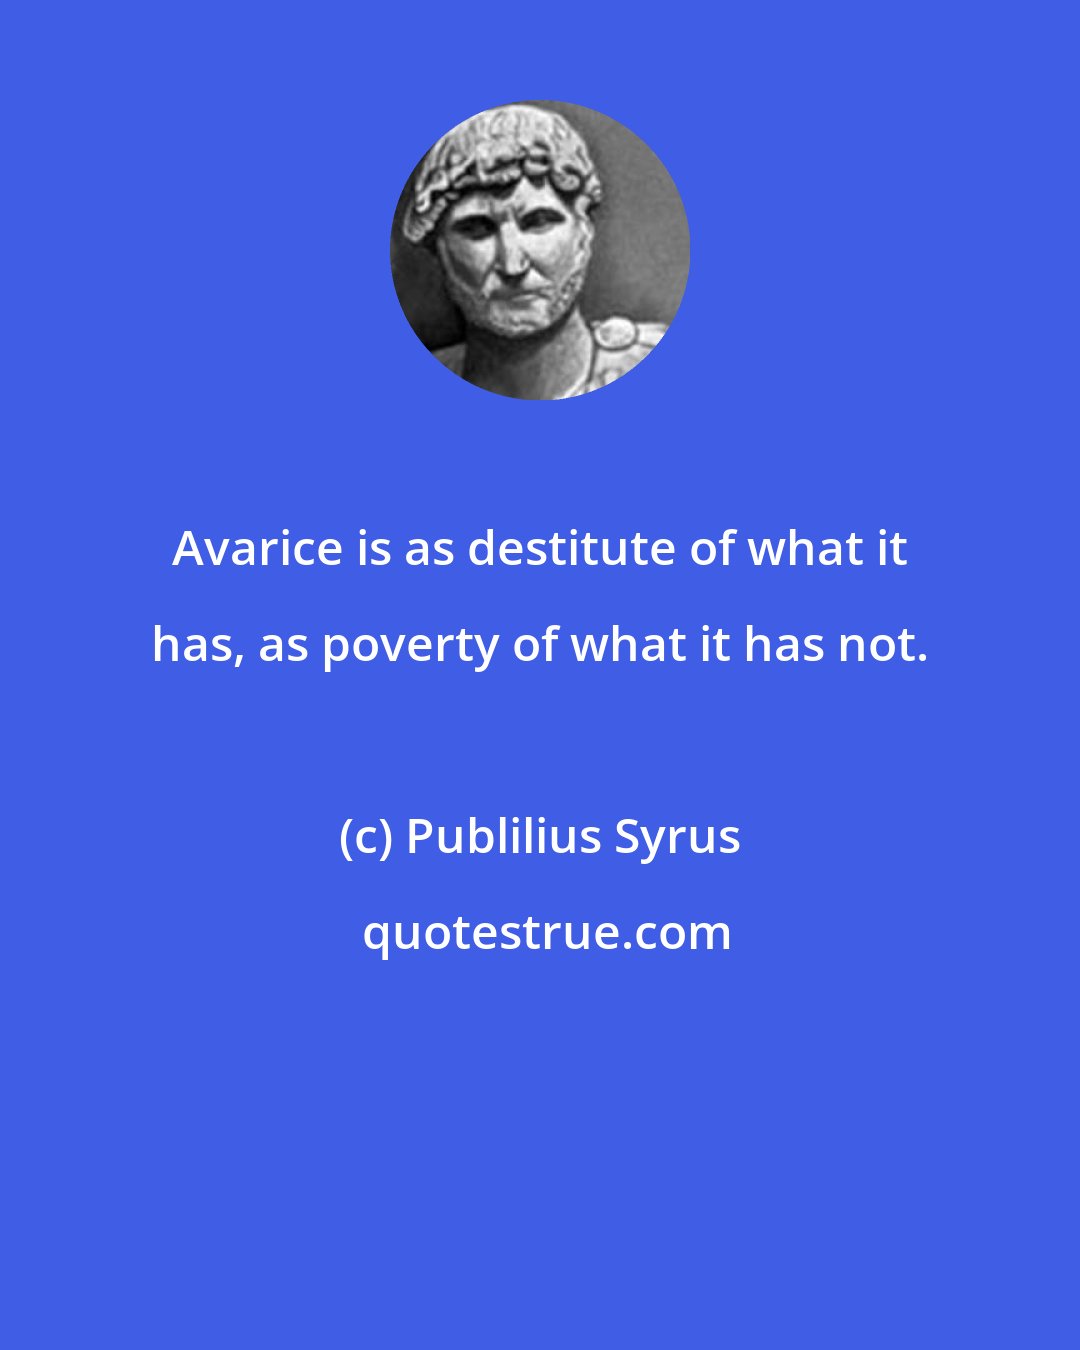 Publilius Syrus: Avarice is as destitute of what it has, as poverty of what it has not.